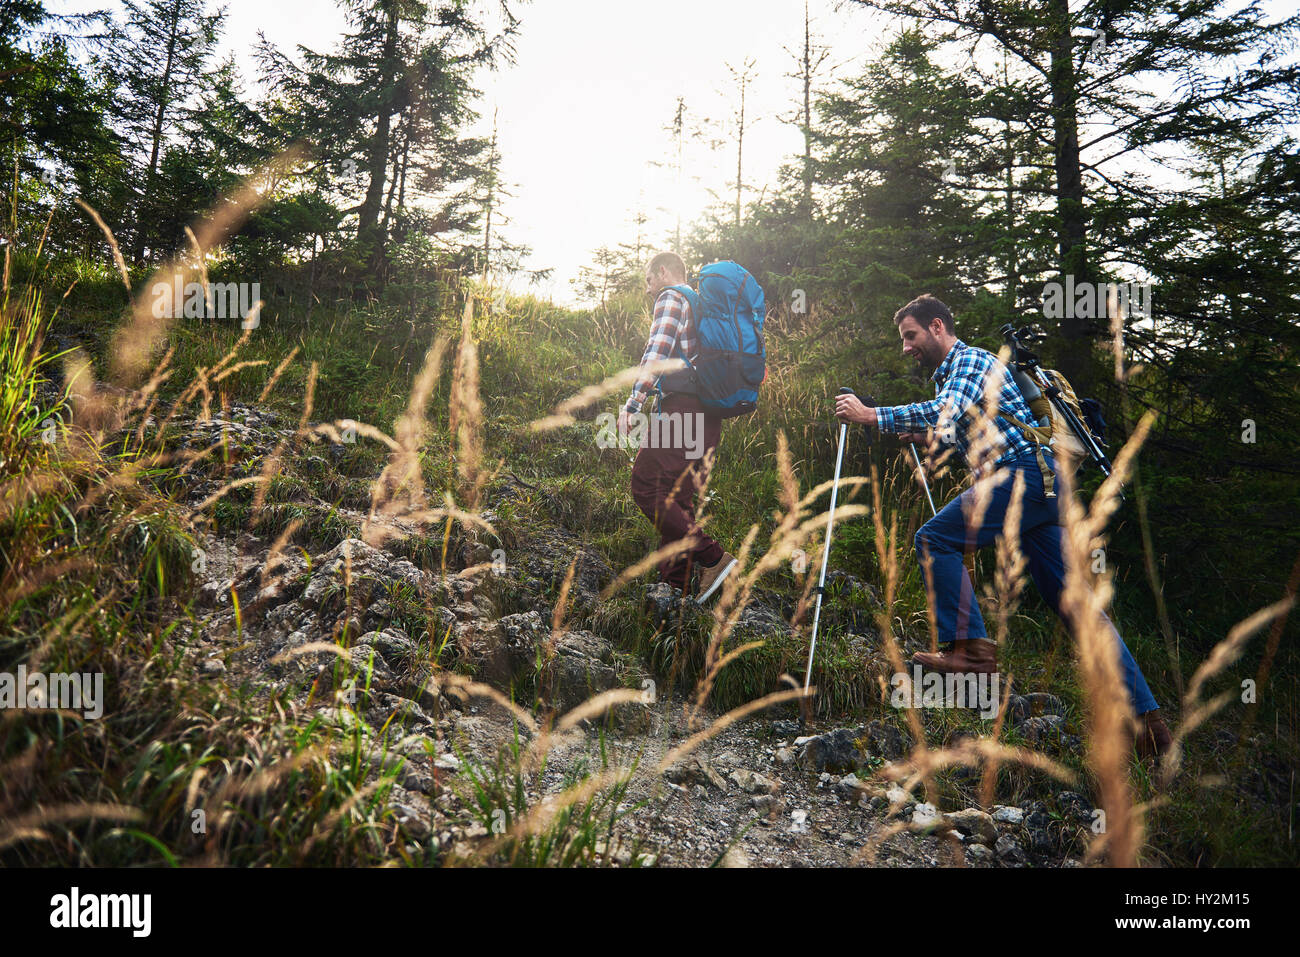 Hikers making their way up a rocky forest trail Stock Photo